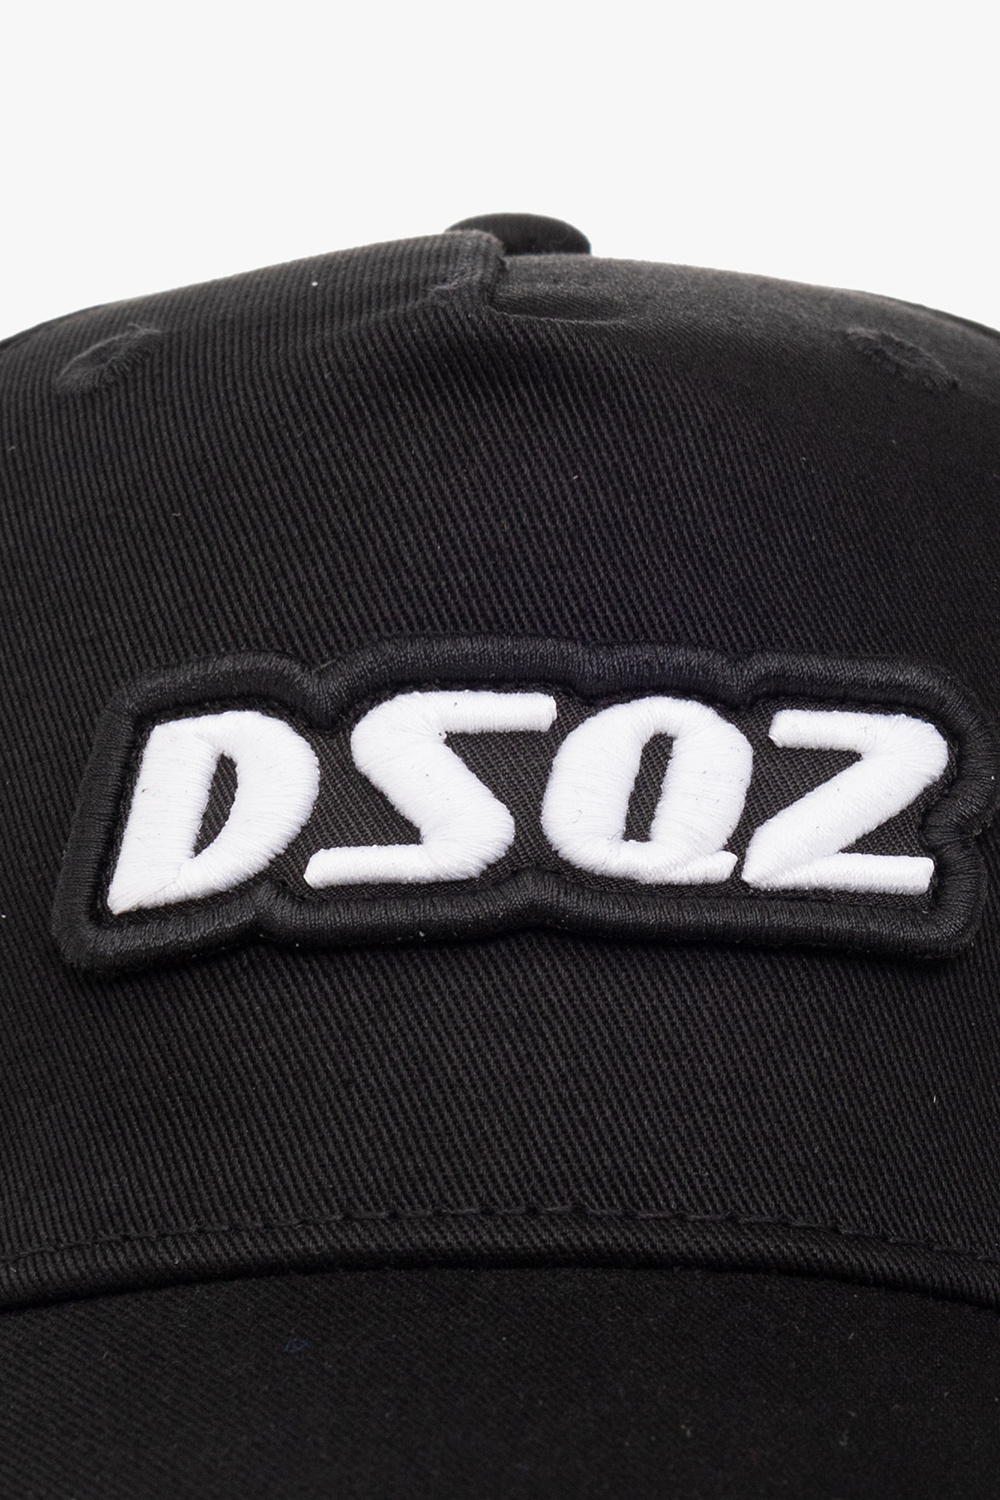 Dsquared2 Hats to Match the Air Jordan 5 Shattered Backboard